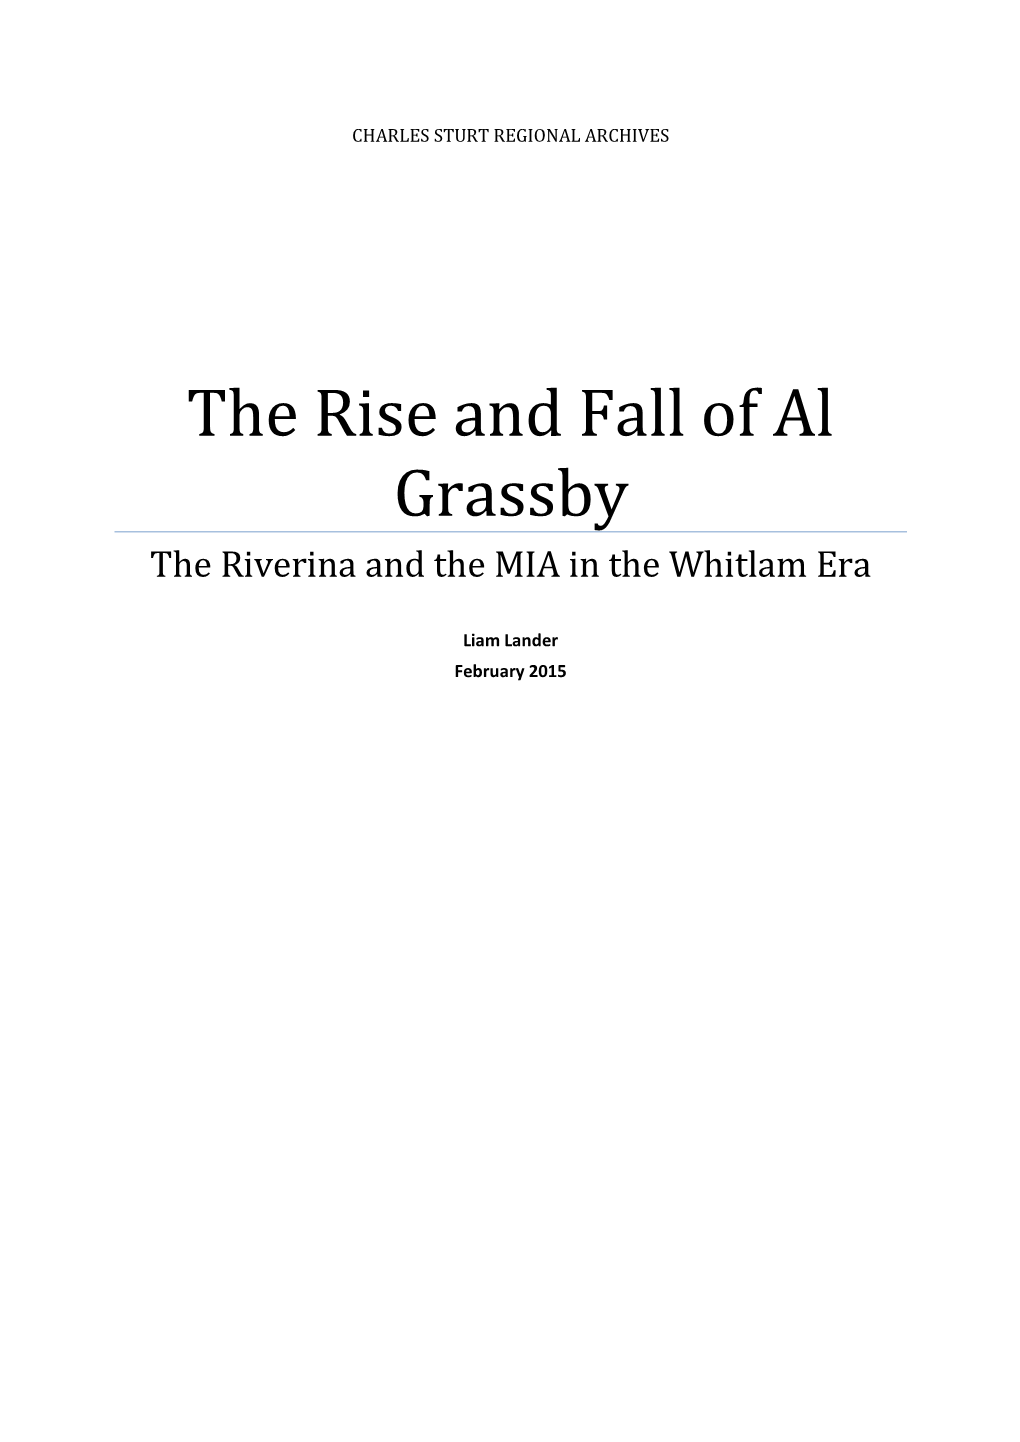 The Rise and Fall of Al Grassby the Riverina and the MIA in the Whitlam Era